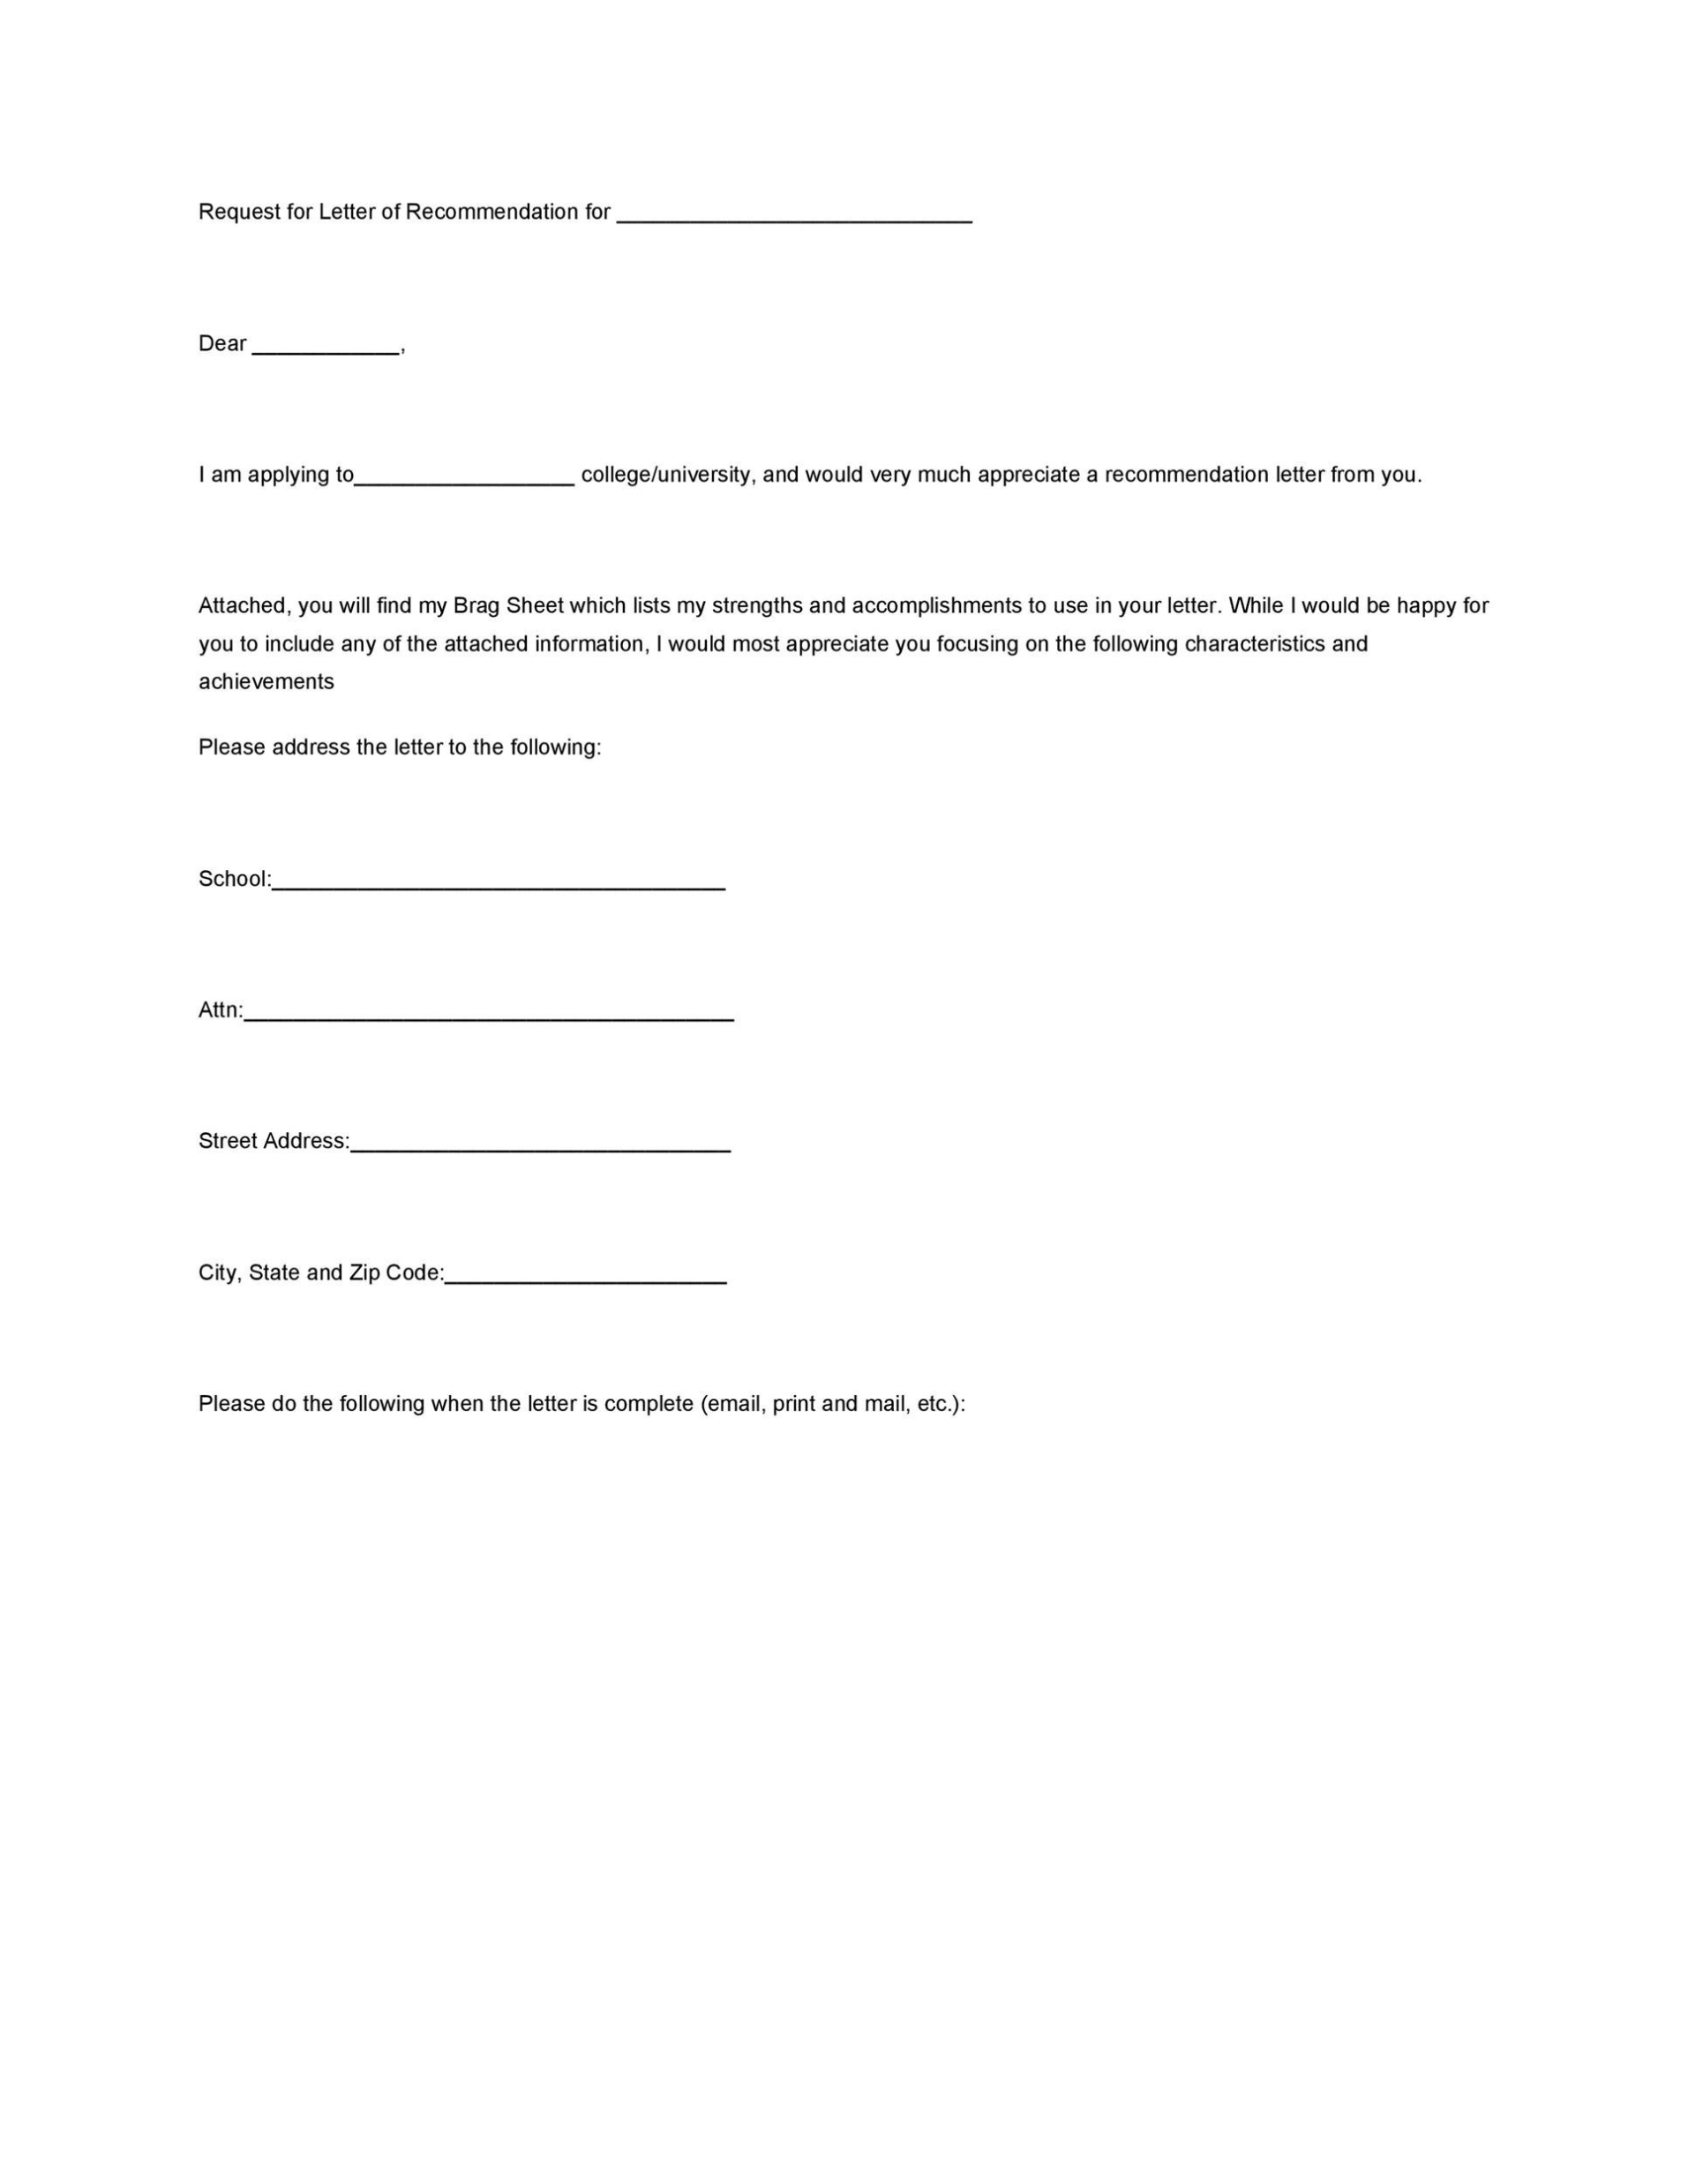 43 Free Letter Of Recommendation Templates & Samples Regarding Letter Of Recomendation Template